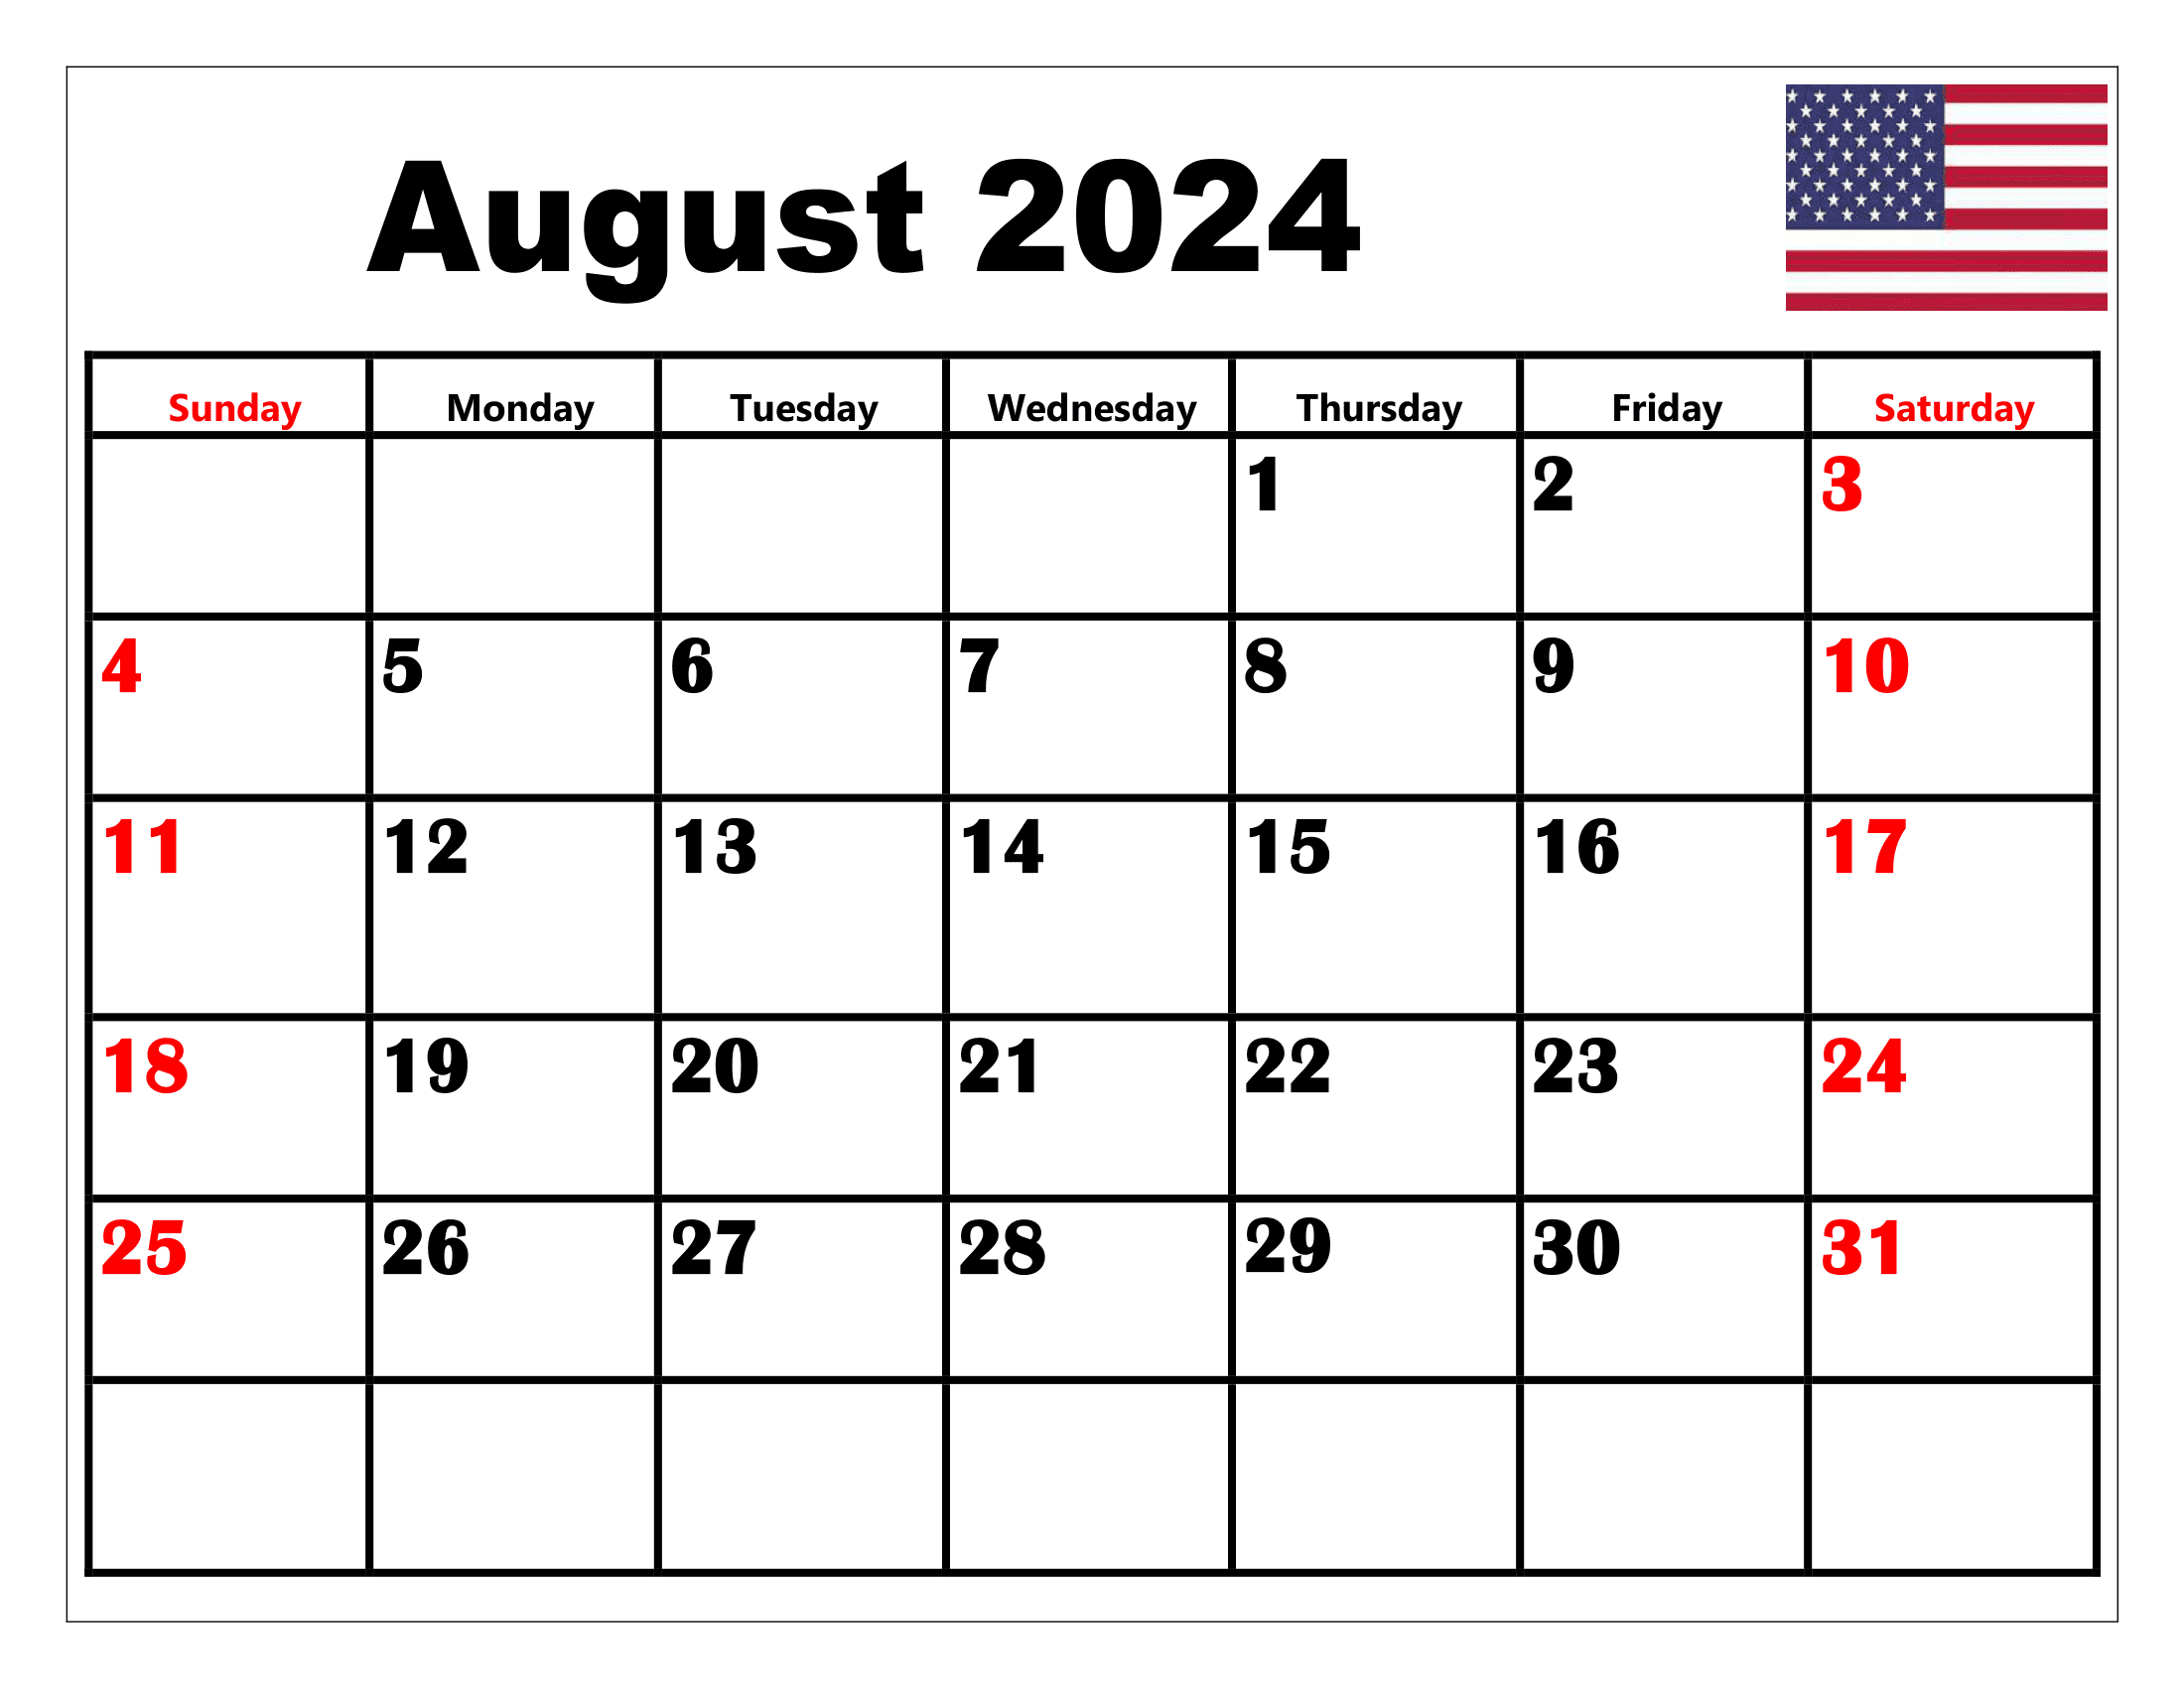 August 2024 Calendar Printable Pdf Templates Free Download with regard to Free Printable August 2024 Calendar With Holidays